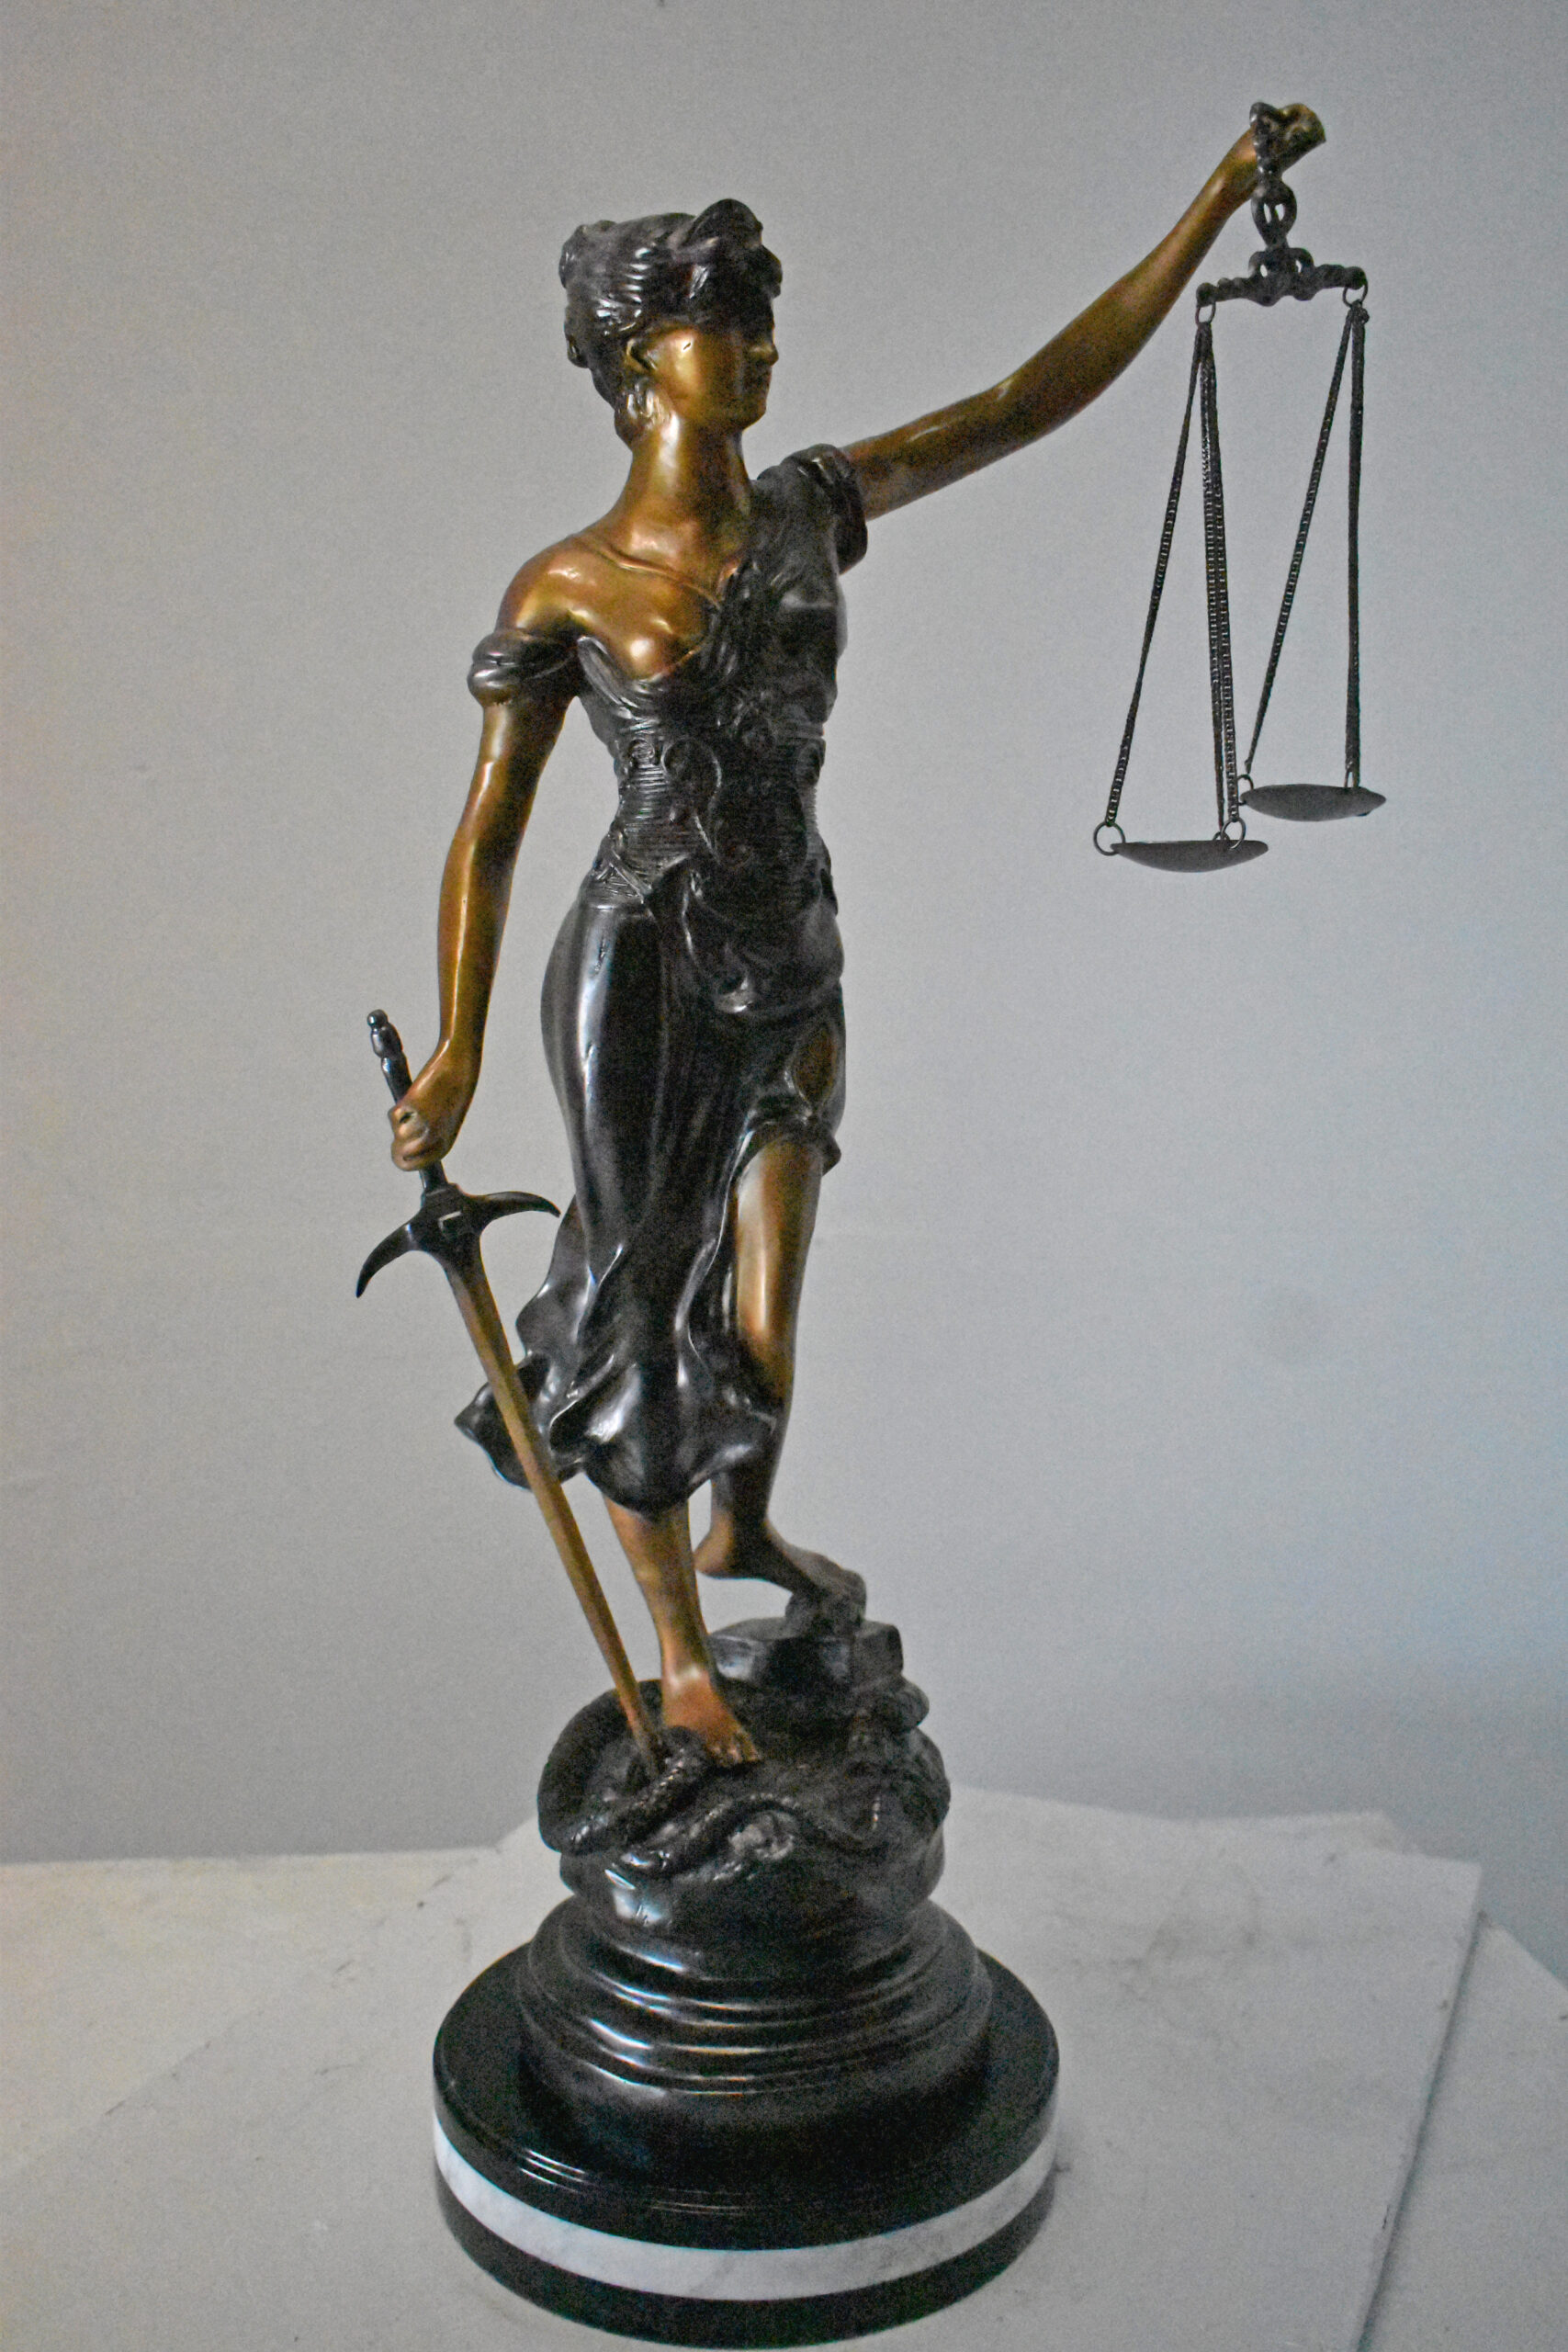 Lady Justice statue mounted on a marble Size: 14"L x 16"W x 32"H. - NiFAO